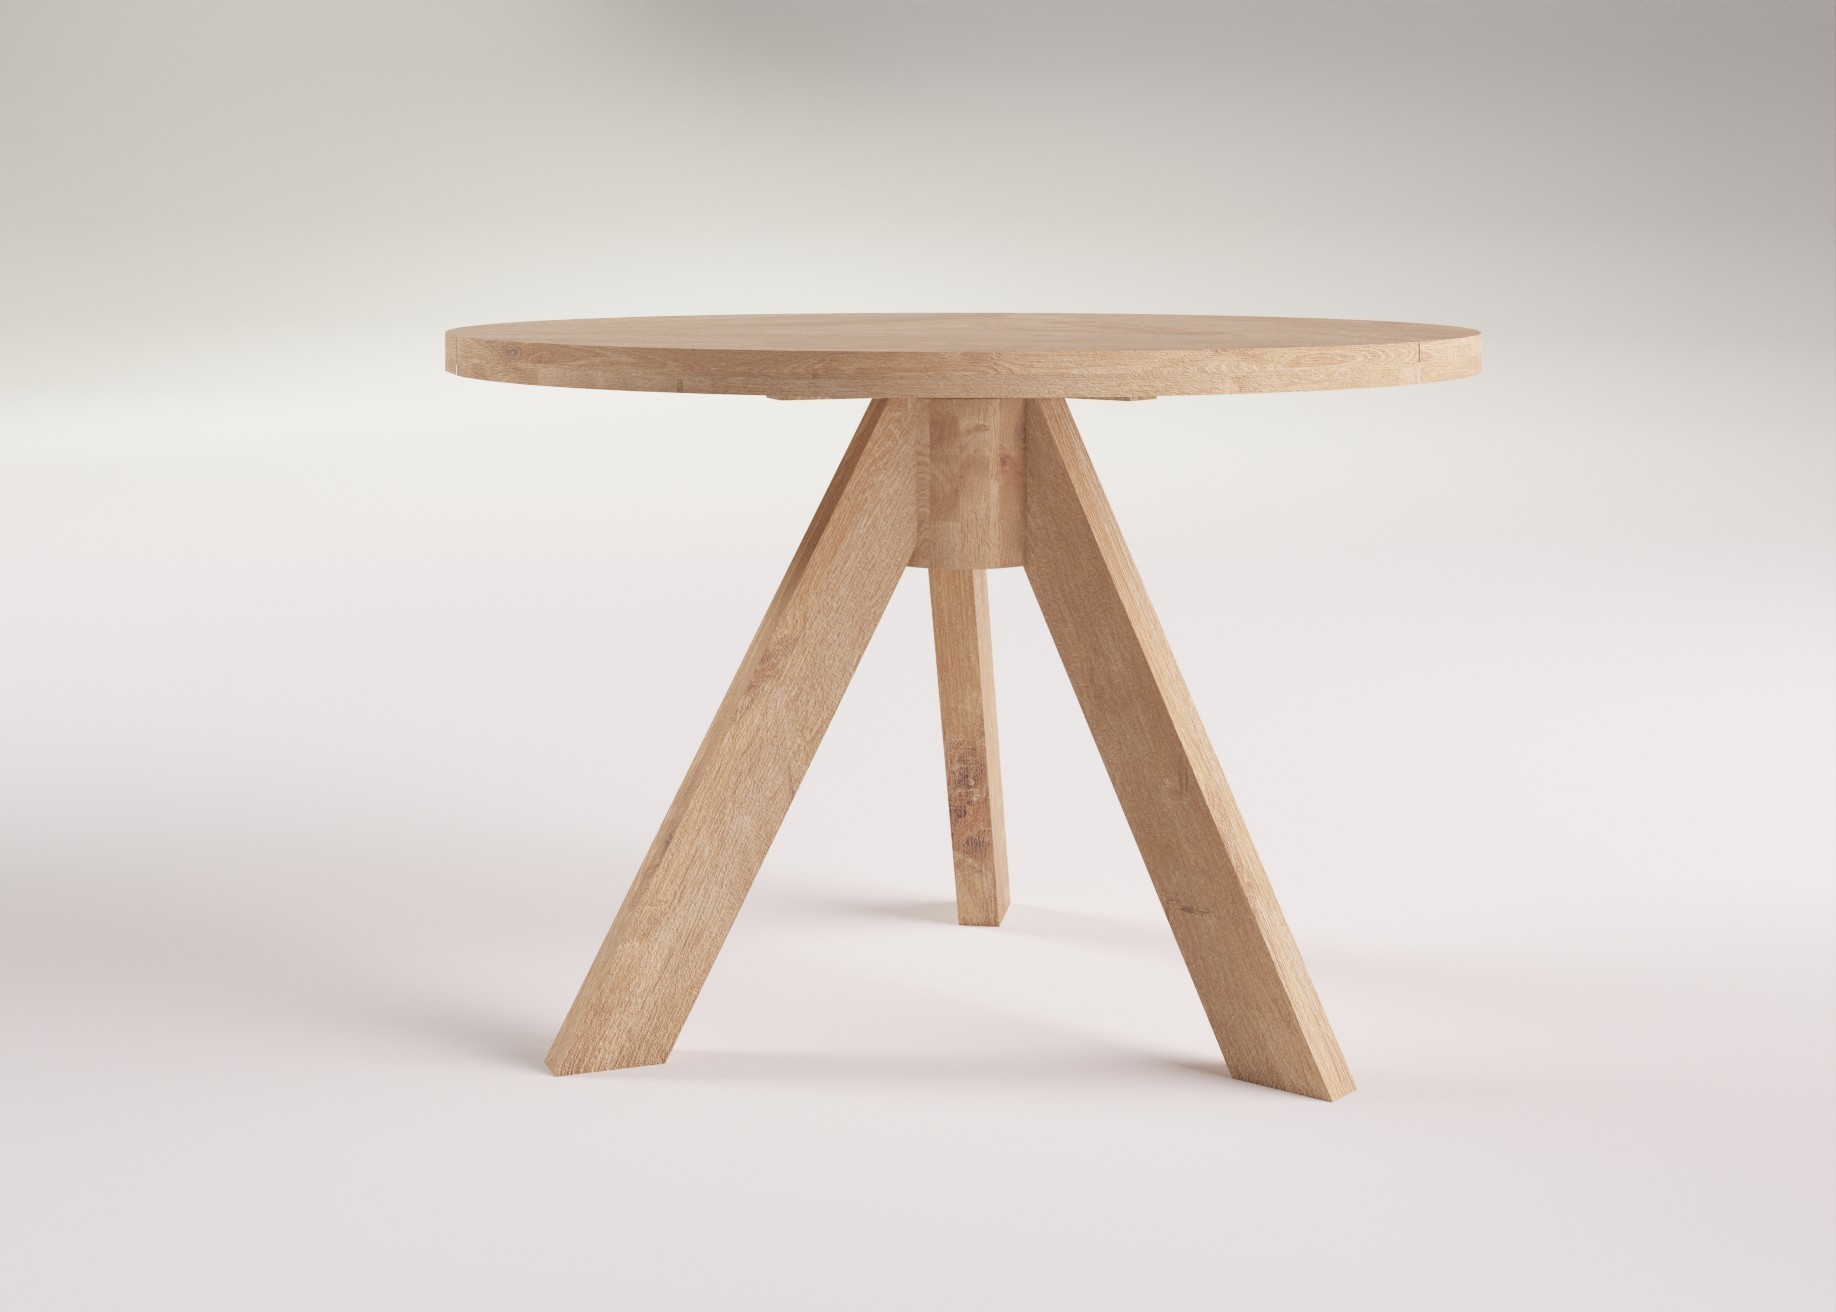 GRIND round dining table made from oak wood